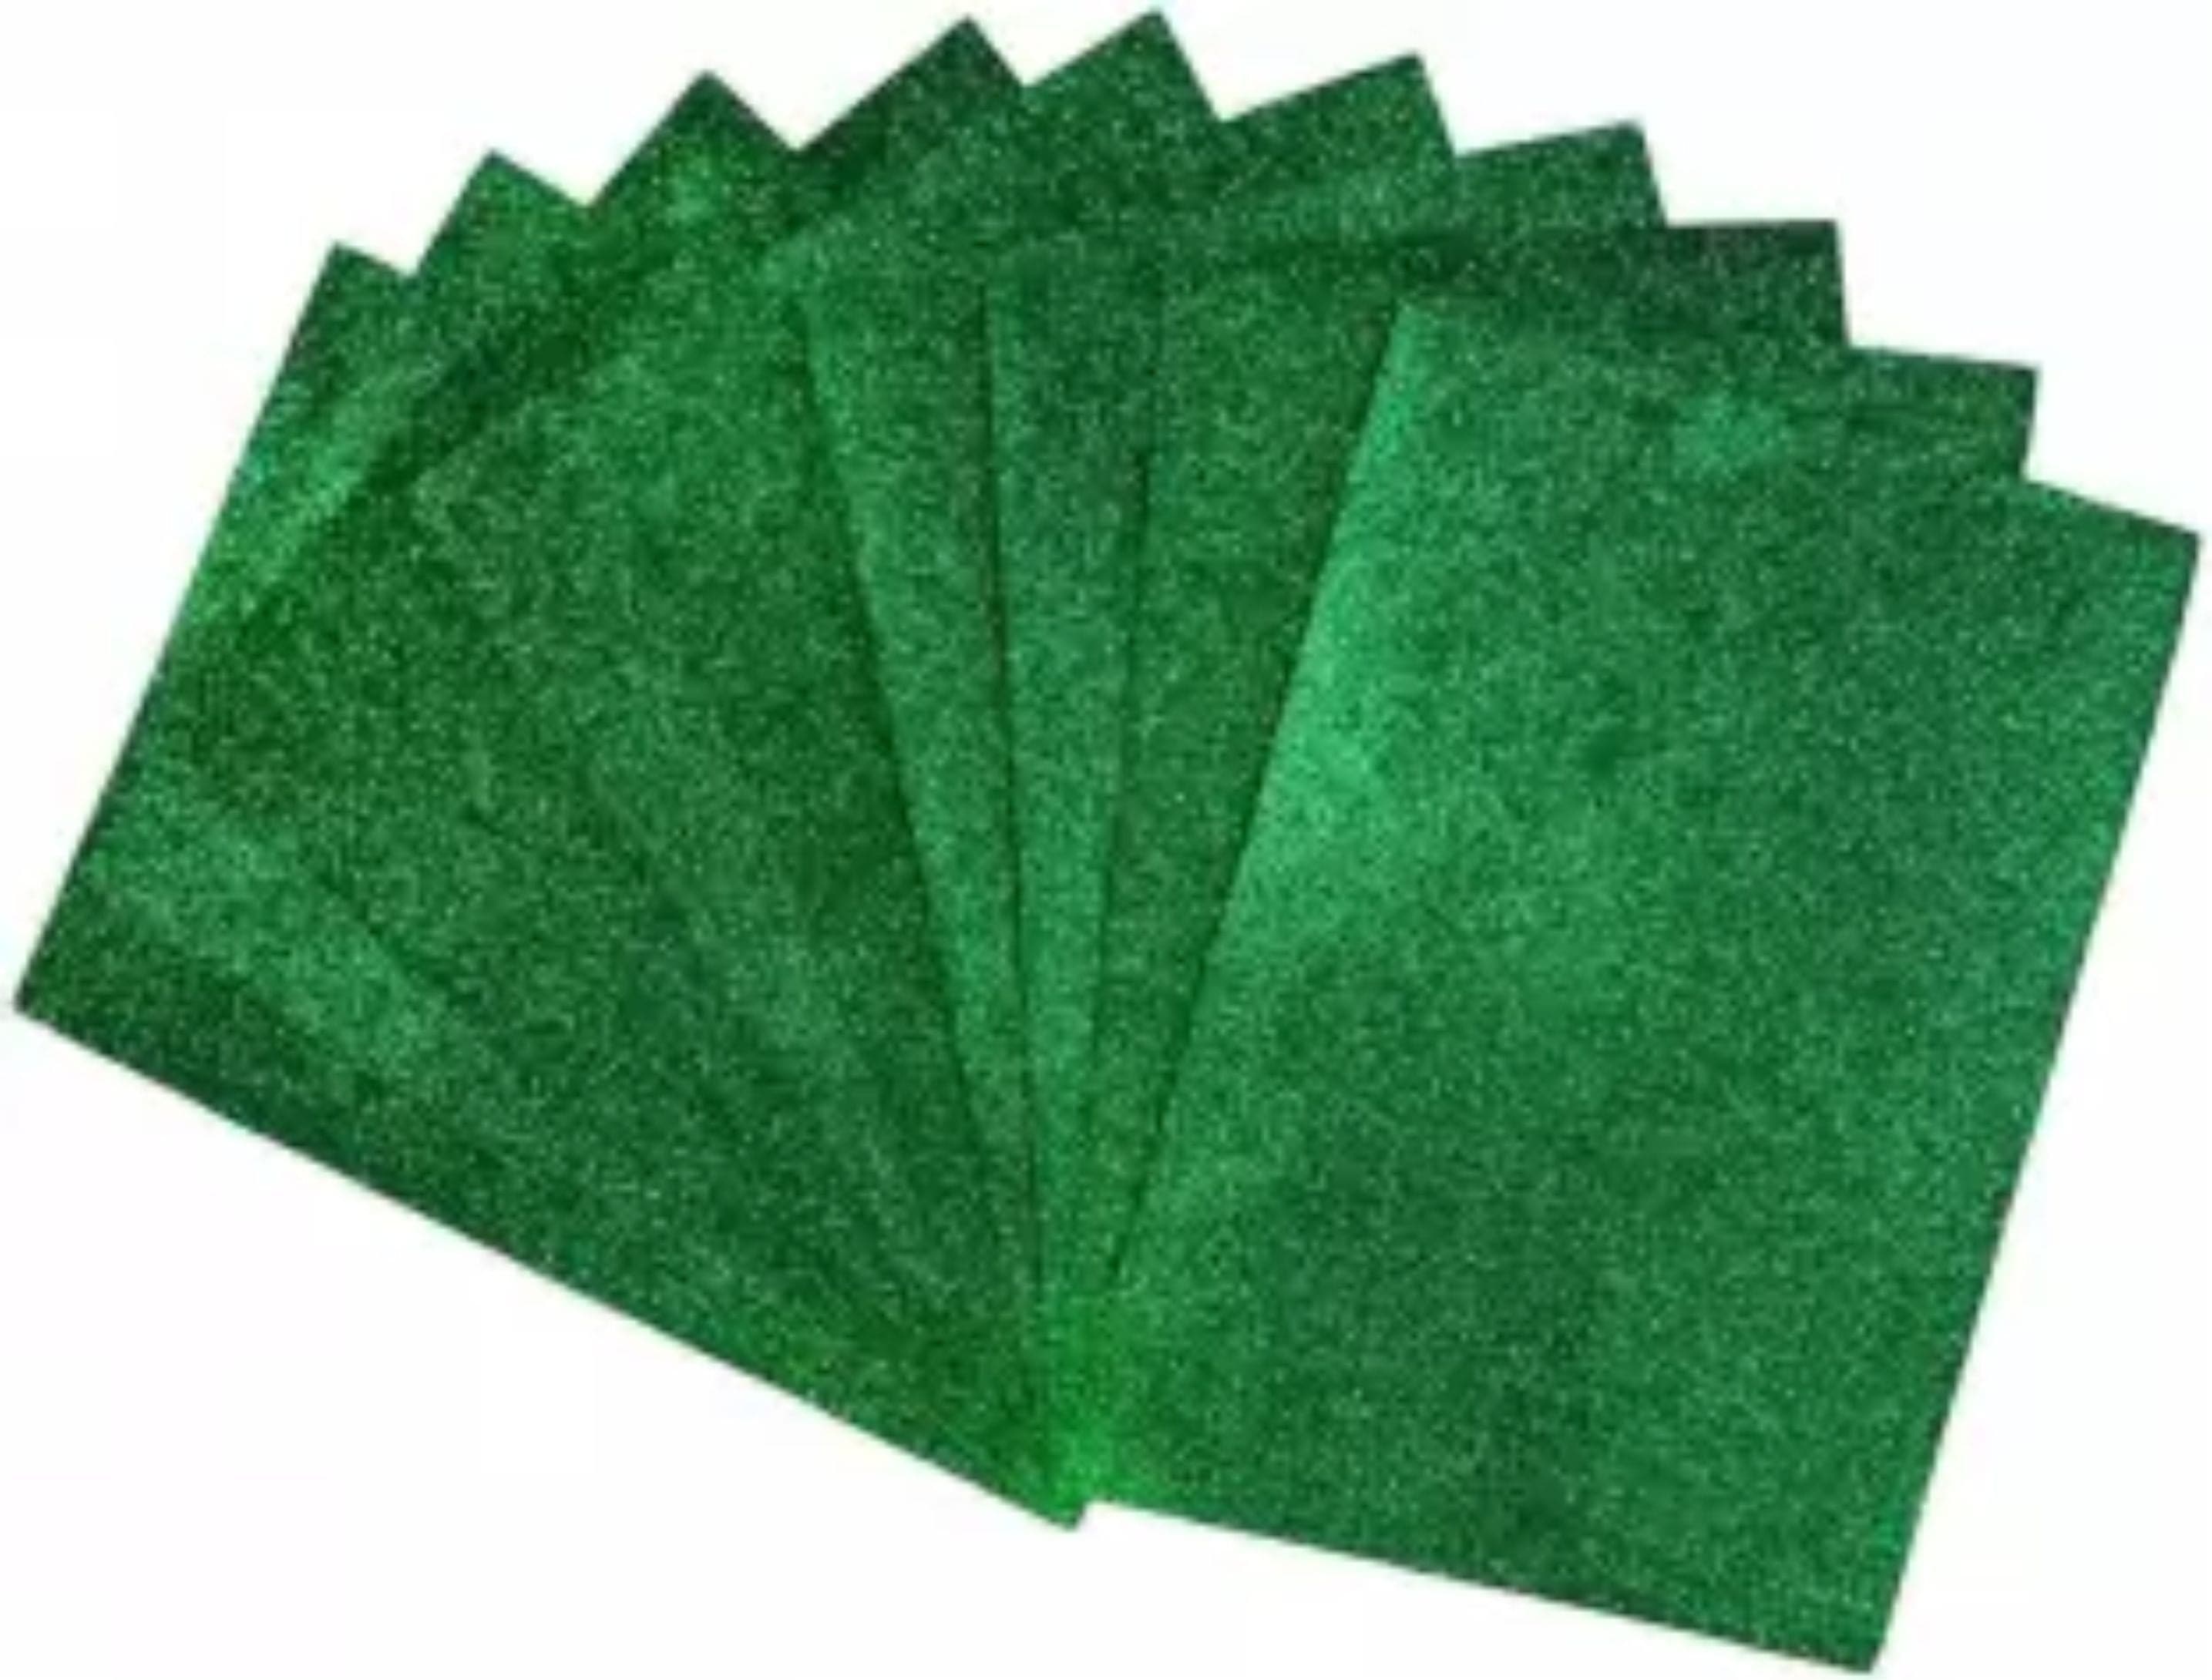 Foaming Glitter Sheets A4 Size Pack of 10